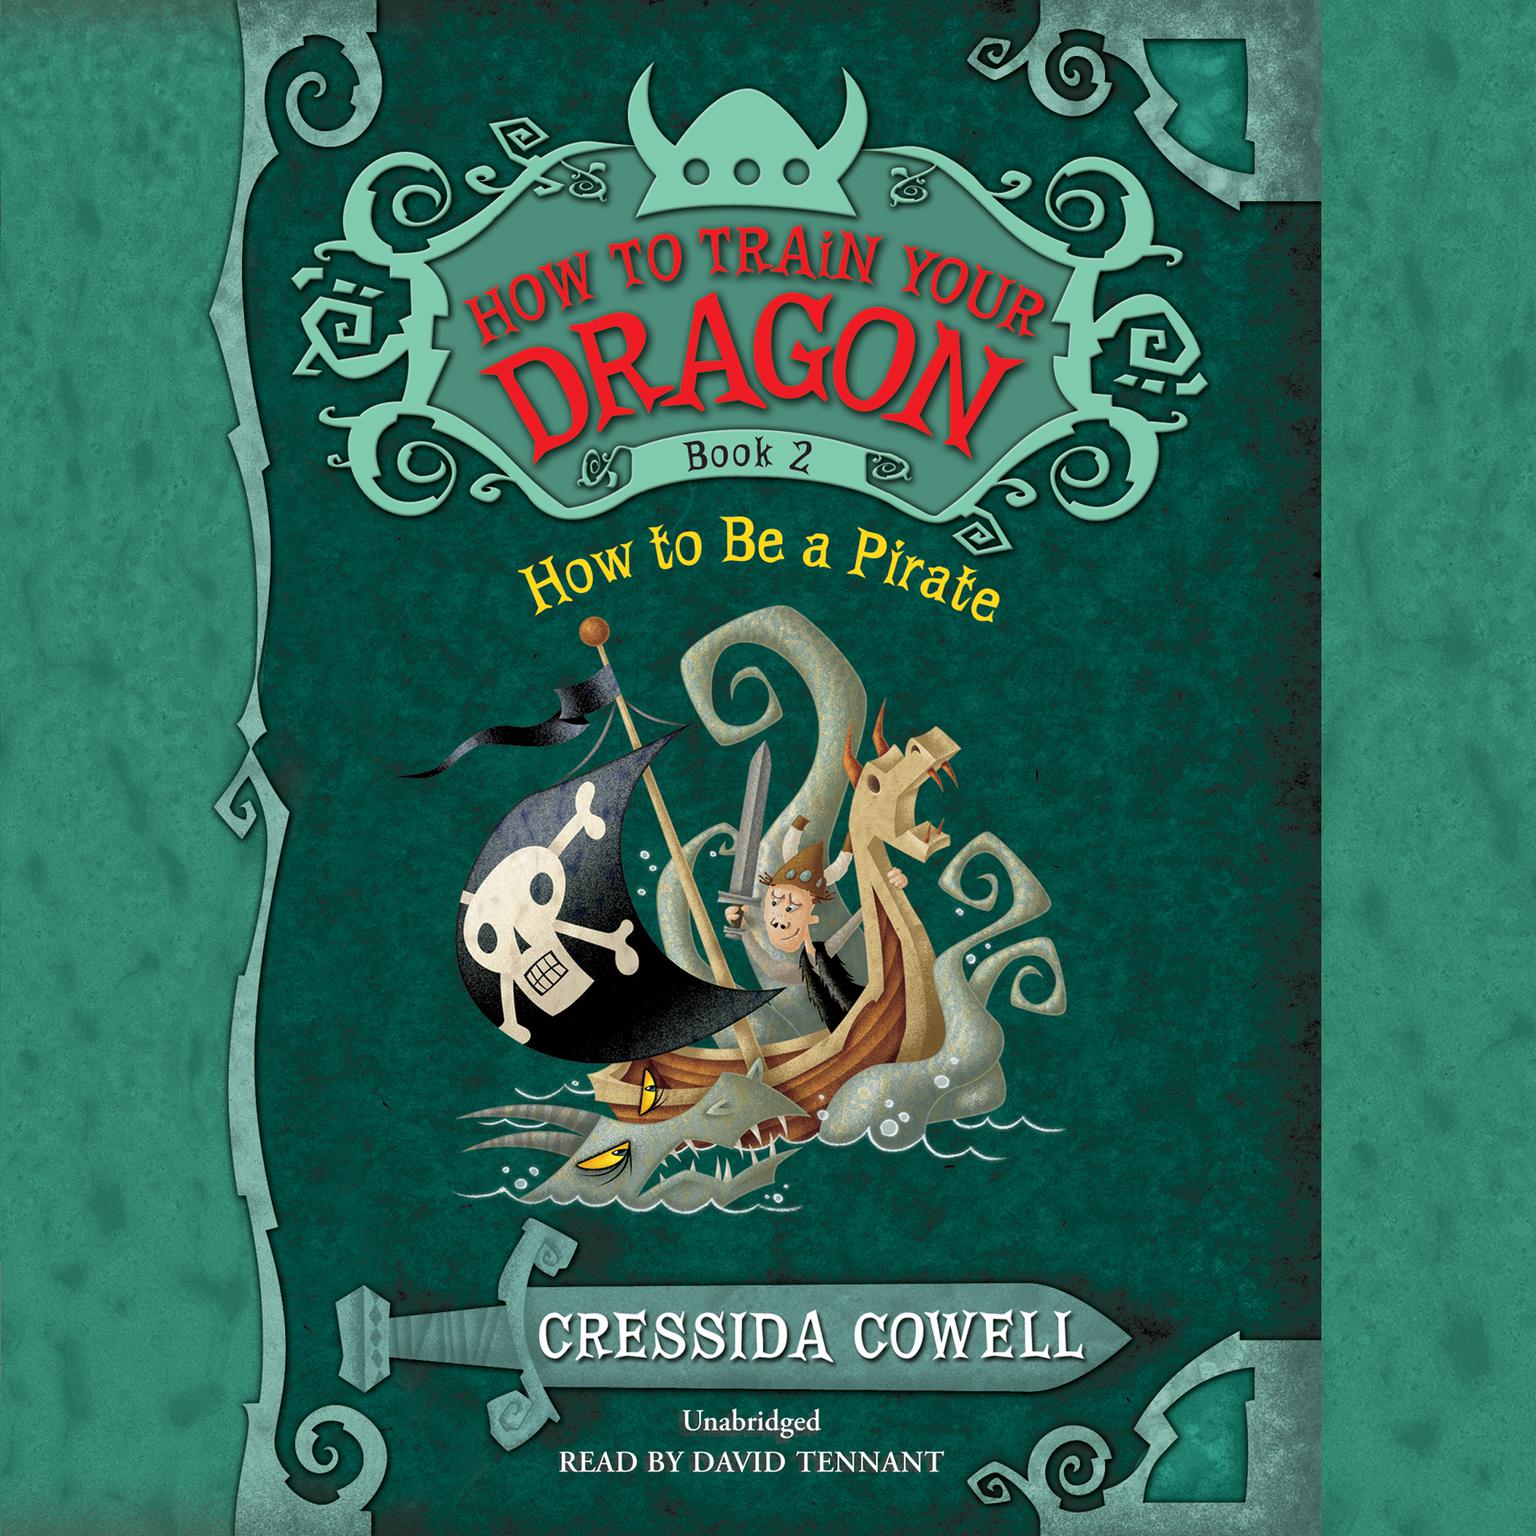 HOW TO BE A PIRATE Audiobook, by Cressida Cowell